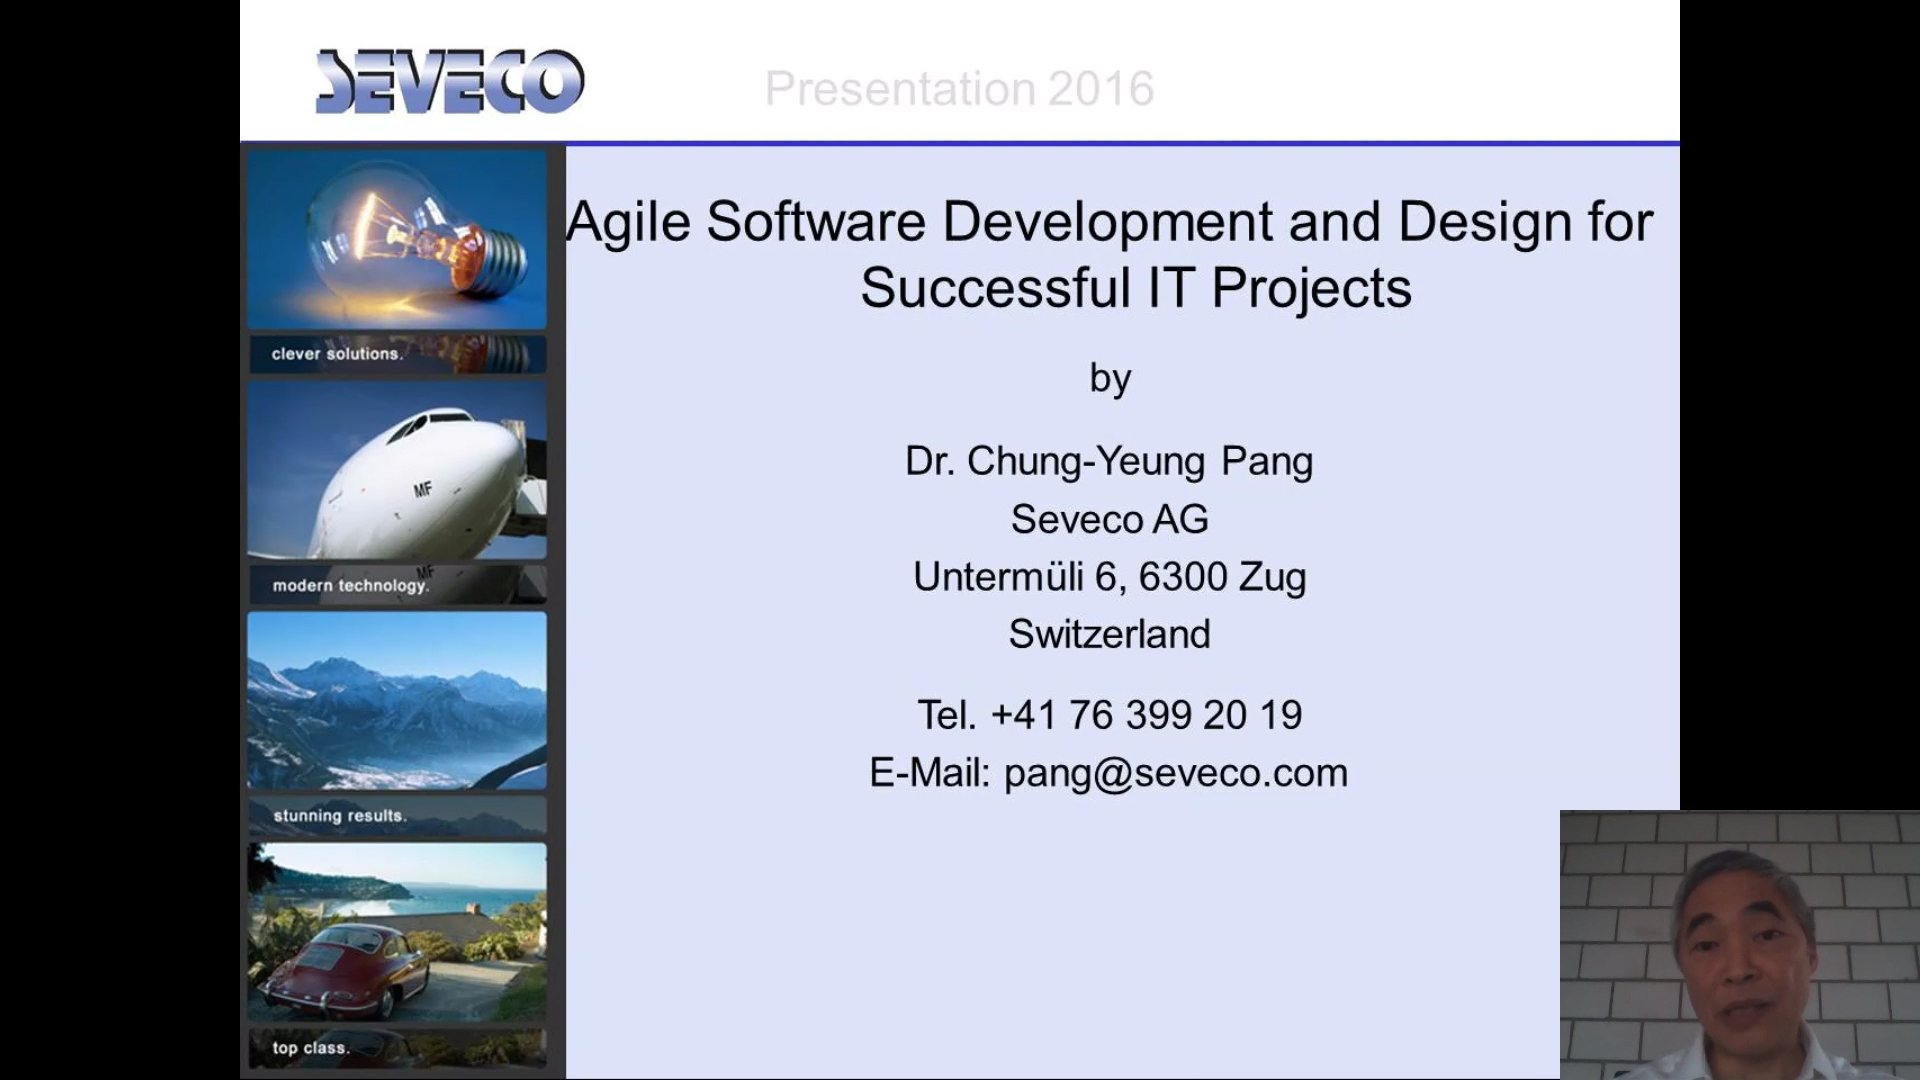 Agile Software Development and Design for Successful IT Projects